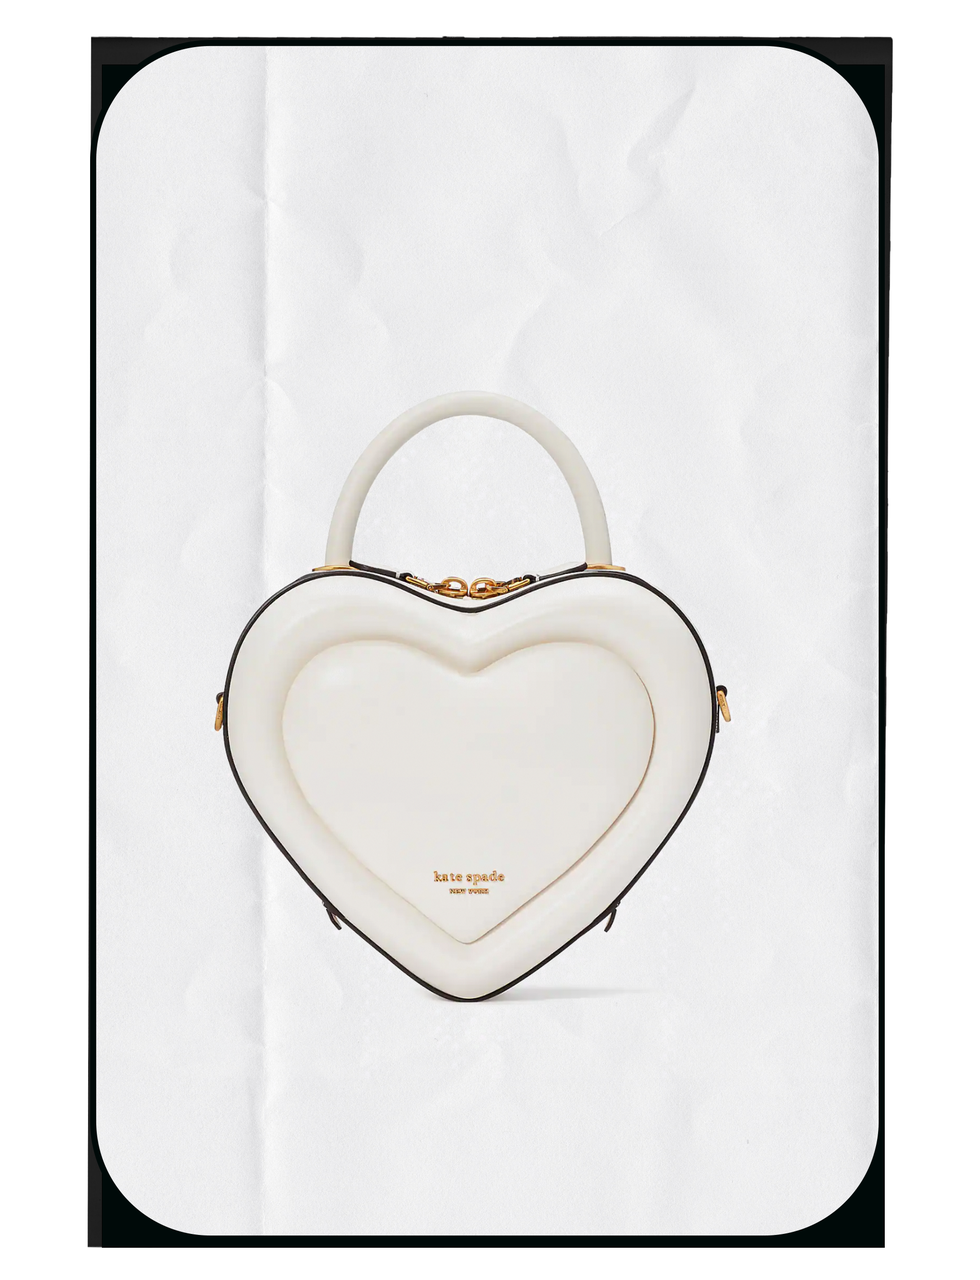 Kate Spade Pitter Patter 3d Heart Leather Bag in Metallic